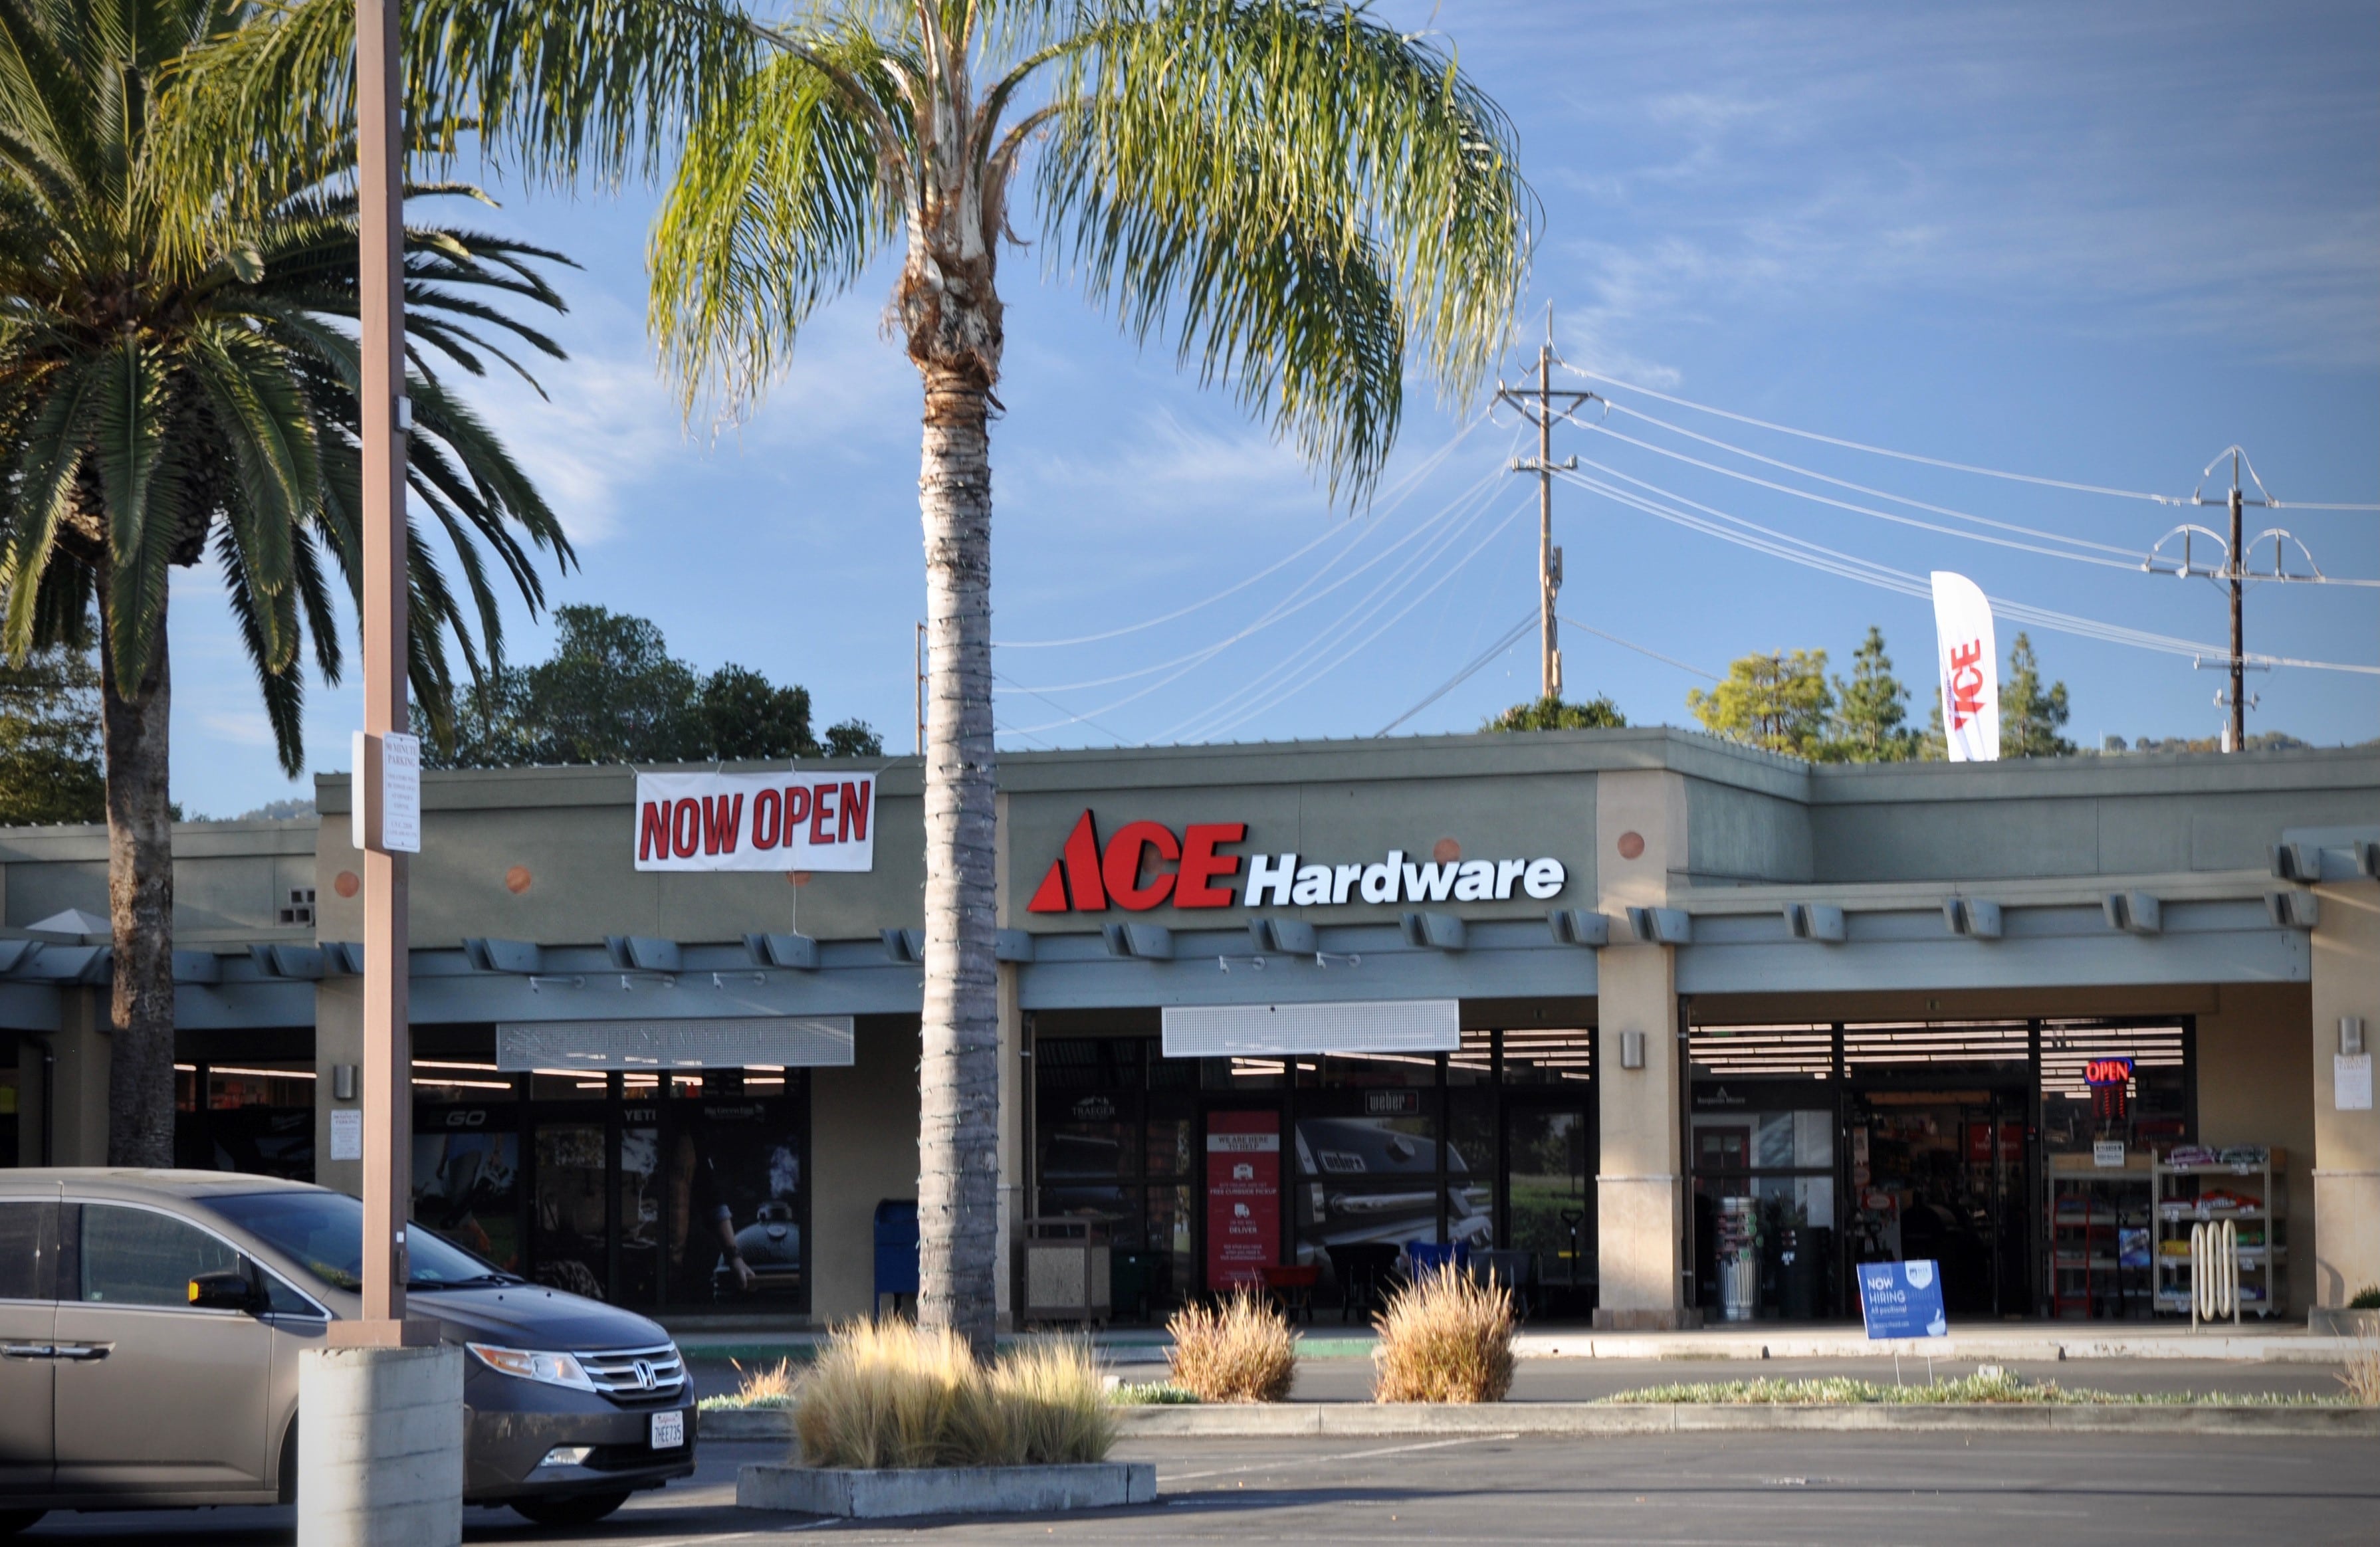 A parking lot view of the storefront signage at Ace Hardware.